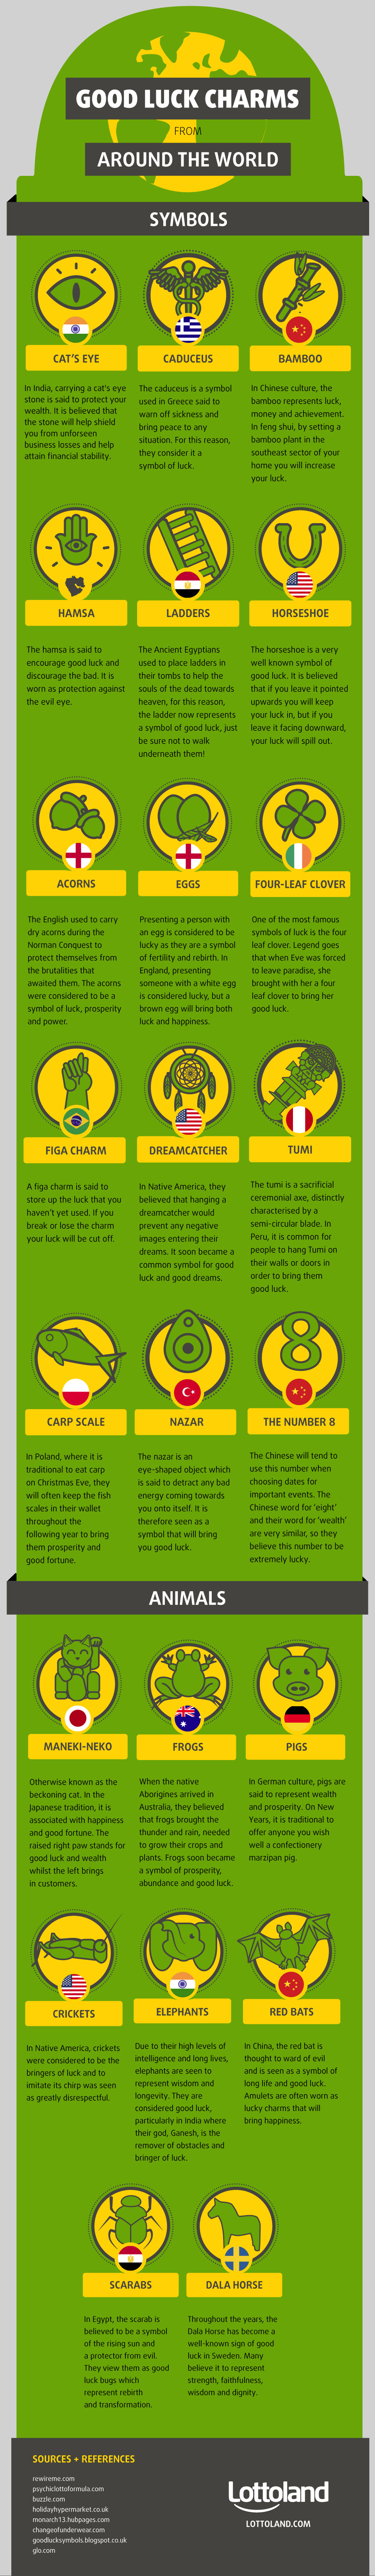 Good Luck Charms from across the globe #infographic